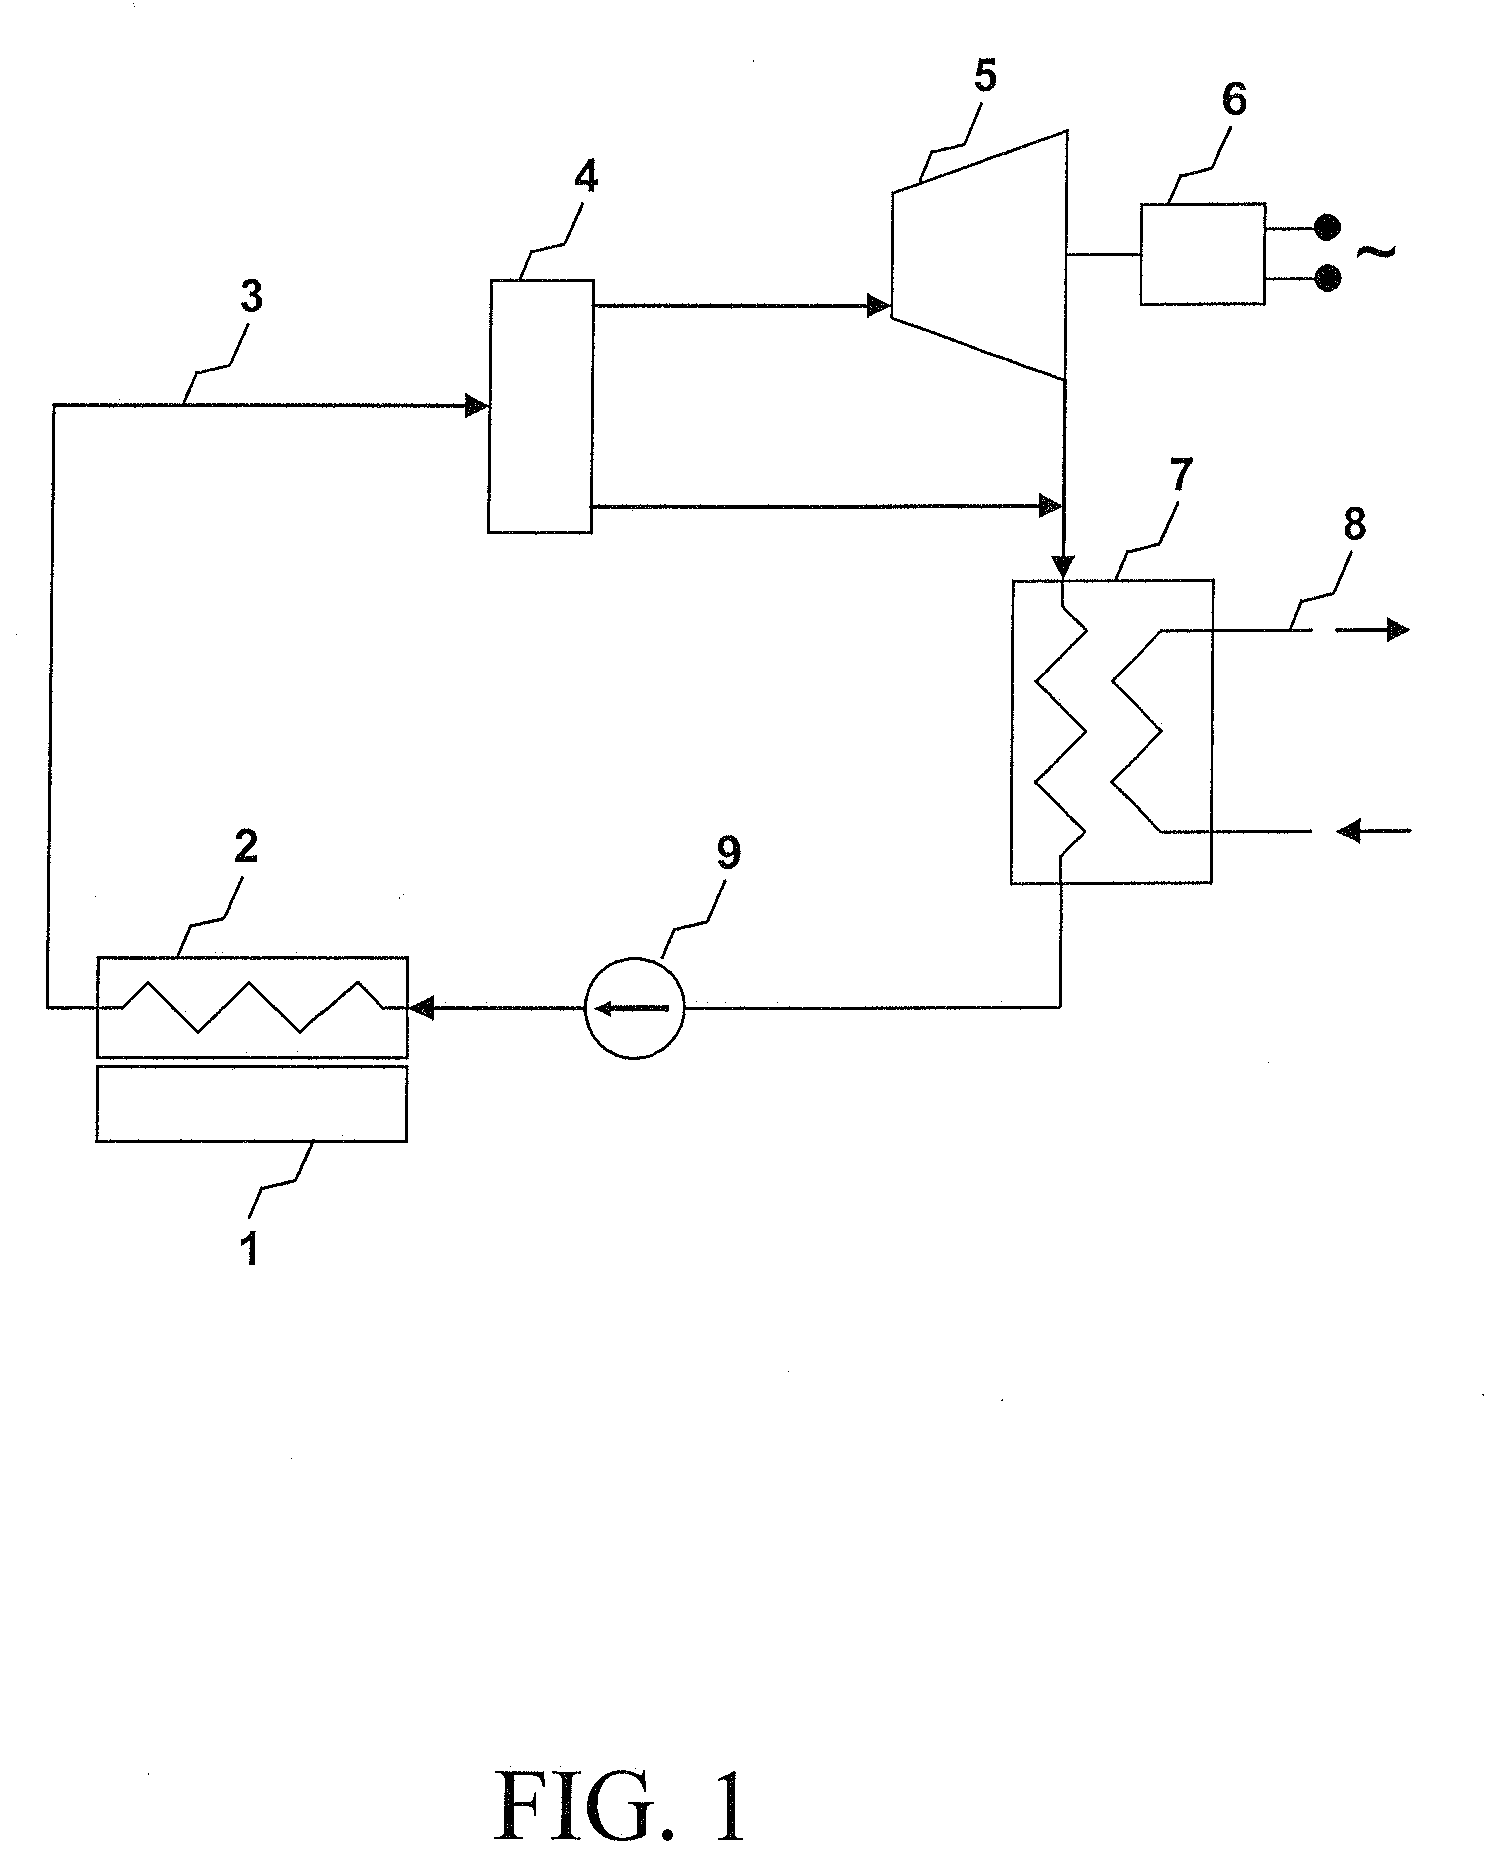 Cooling apparatus for a computer system